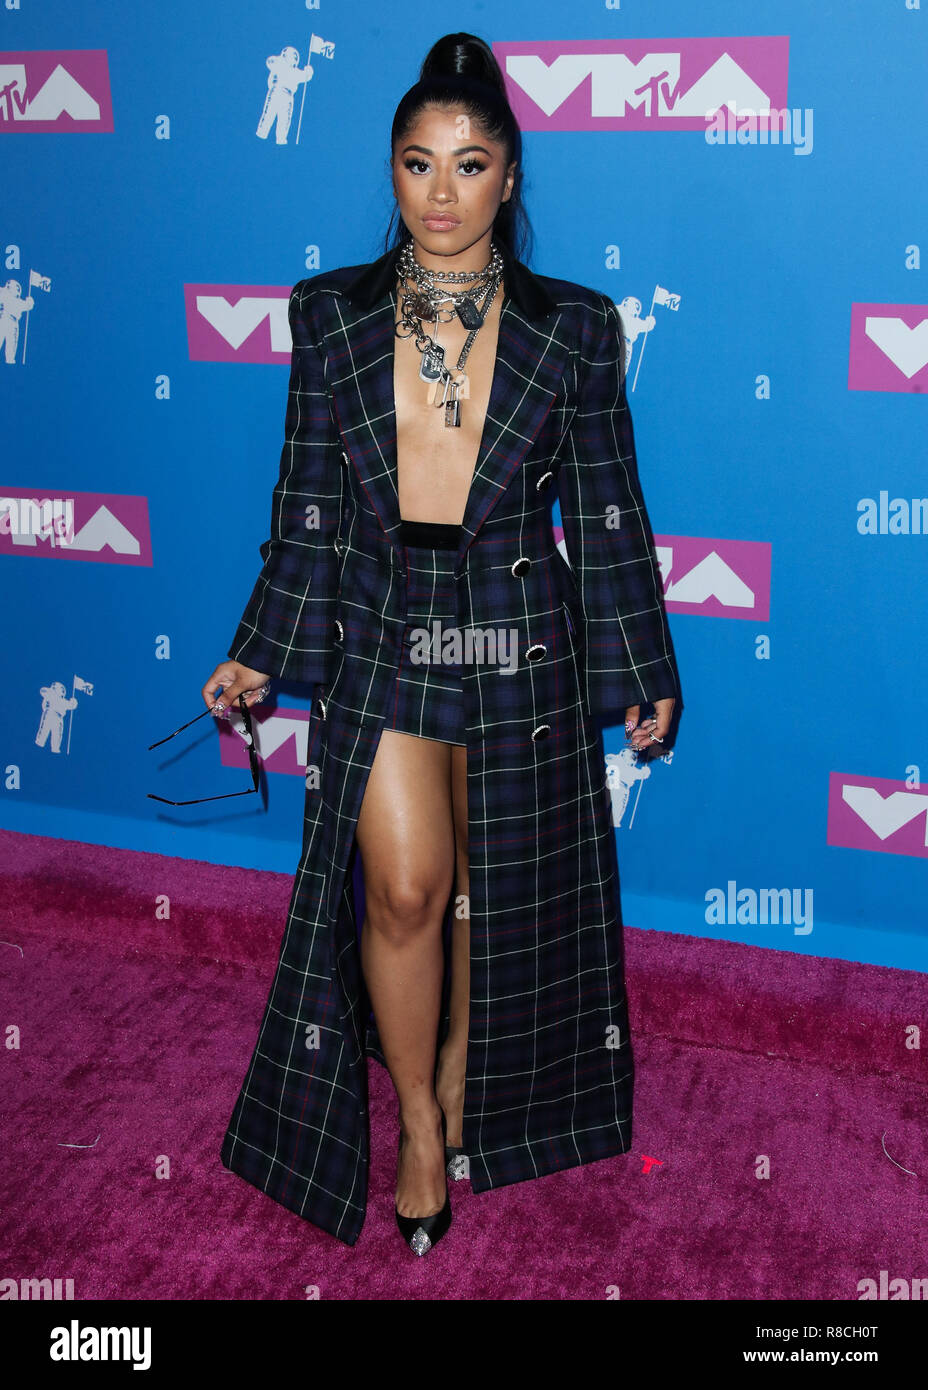 MANHATTAN, NEW YORK CITY, NY, USA - AUGUST 20: Hennessy at the 2018 MTV Video Music Awards held at the Radio City Music Hall on August 20, 2018 in Manhattan, New York City, New York, United States. (Photo by Xavier Collin/Image Press Agency) Stock Photo